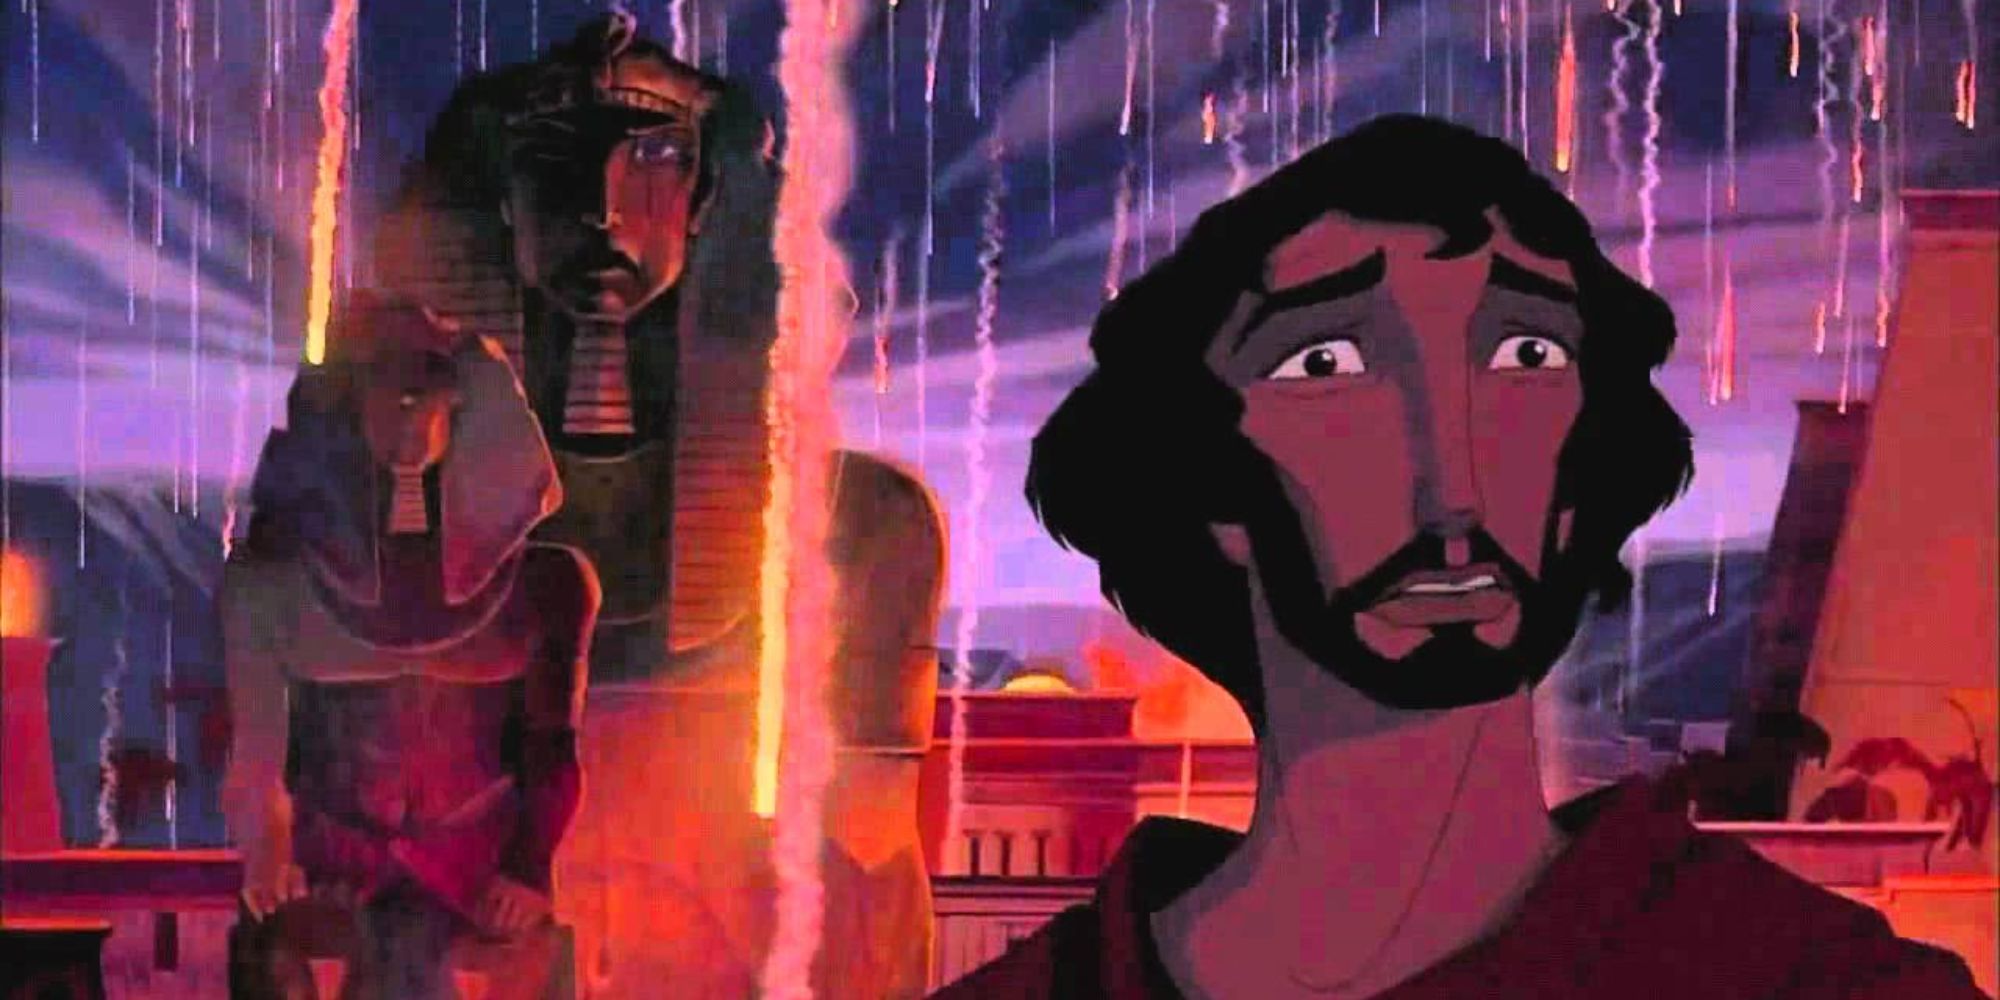 Moses stares in horror as rains of flaming ice devastate the Sphinx in the background